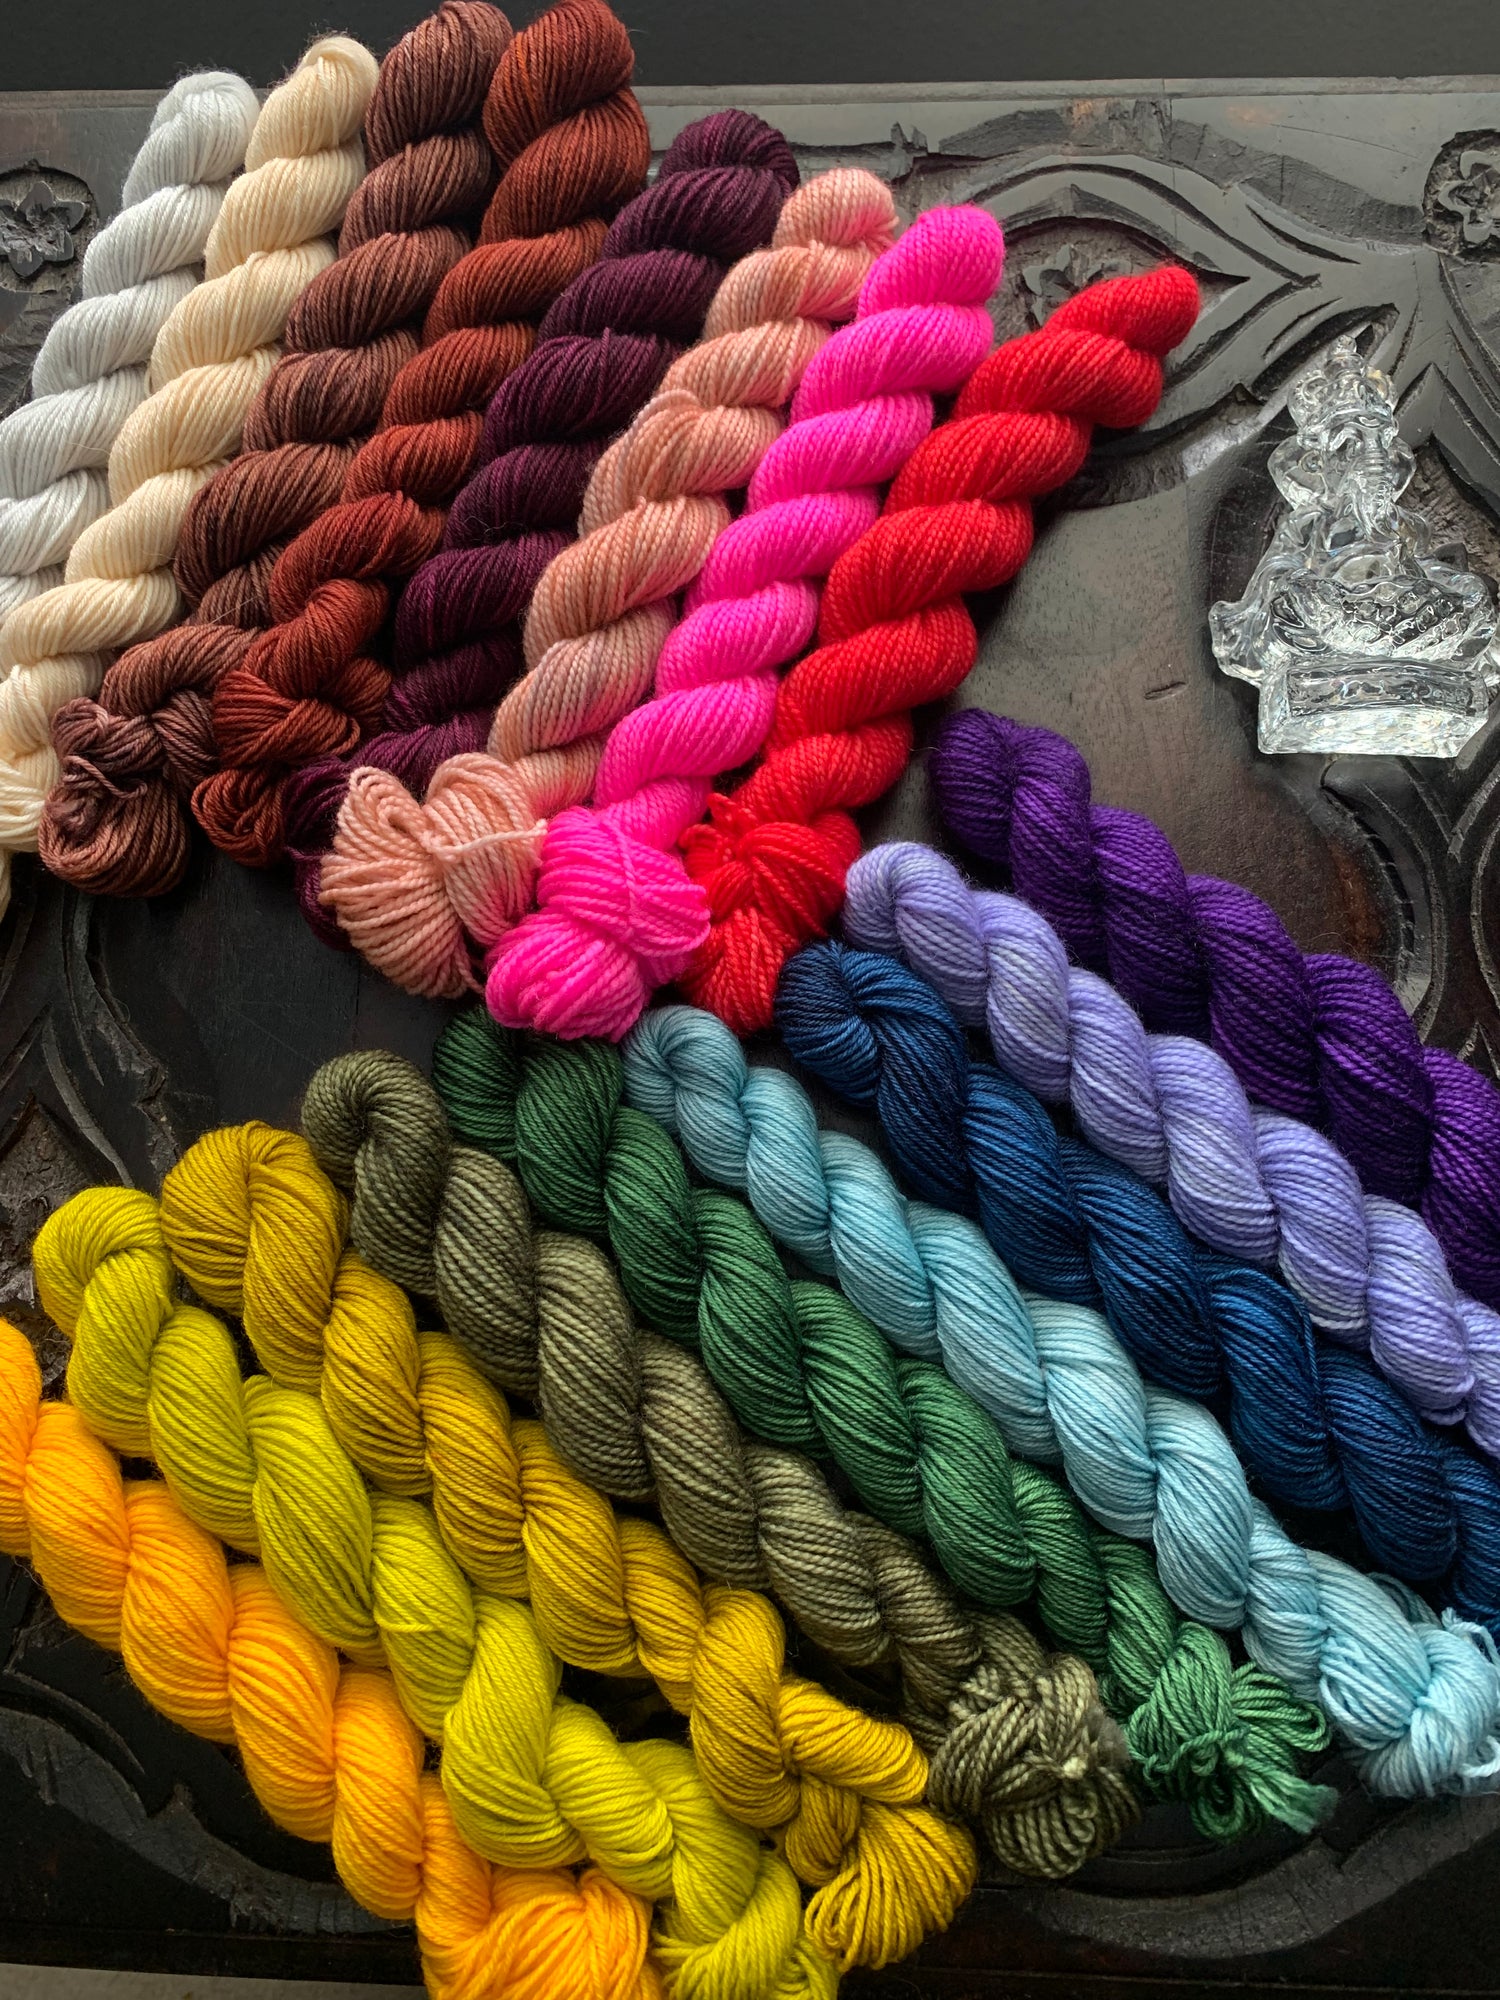 Minis skeins in off-white, cream, brown, peach, bright pink, red, yellows, greens, blues and purples, lay on a table.